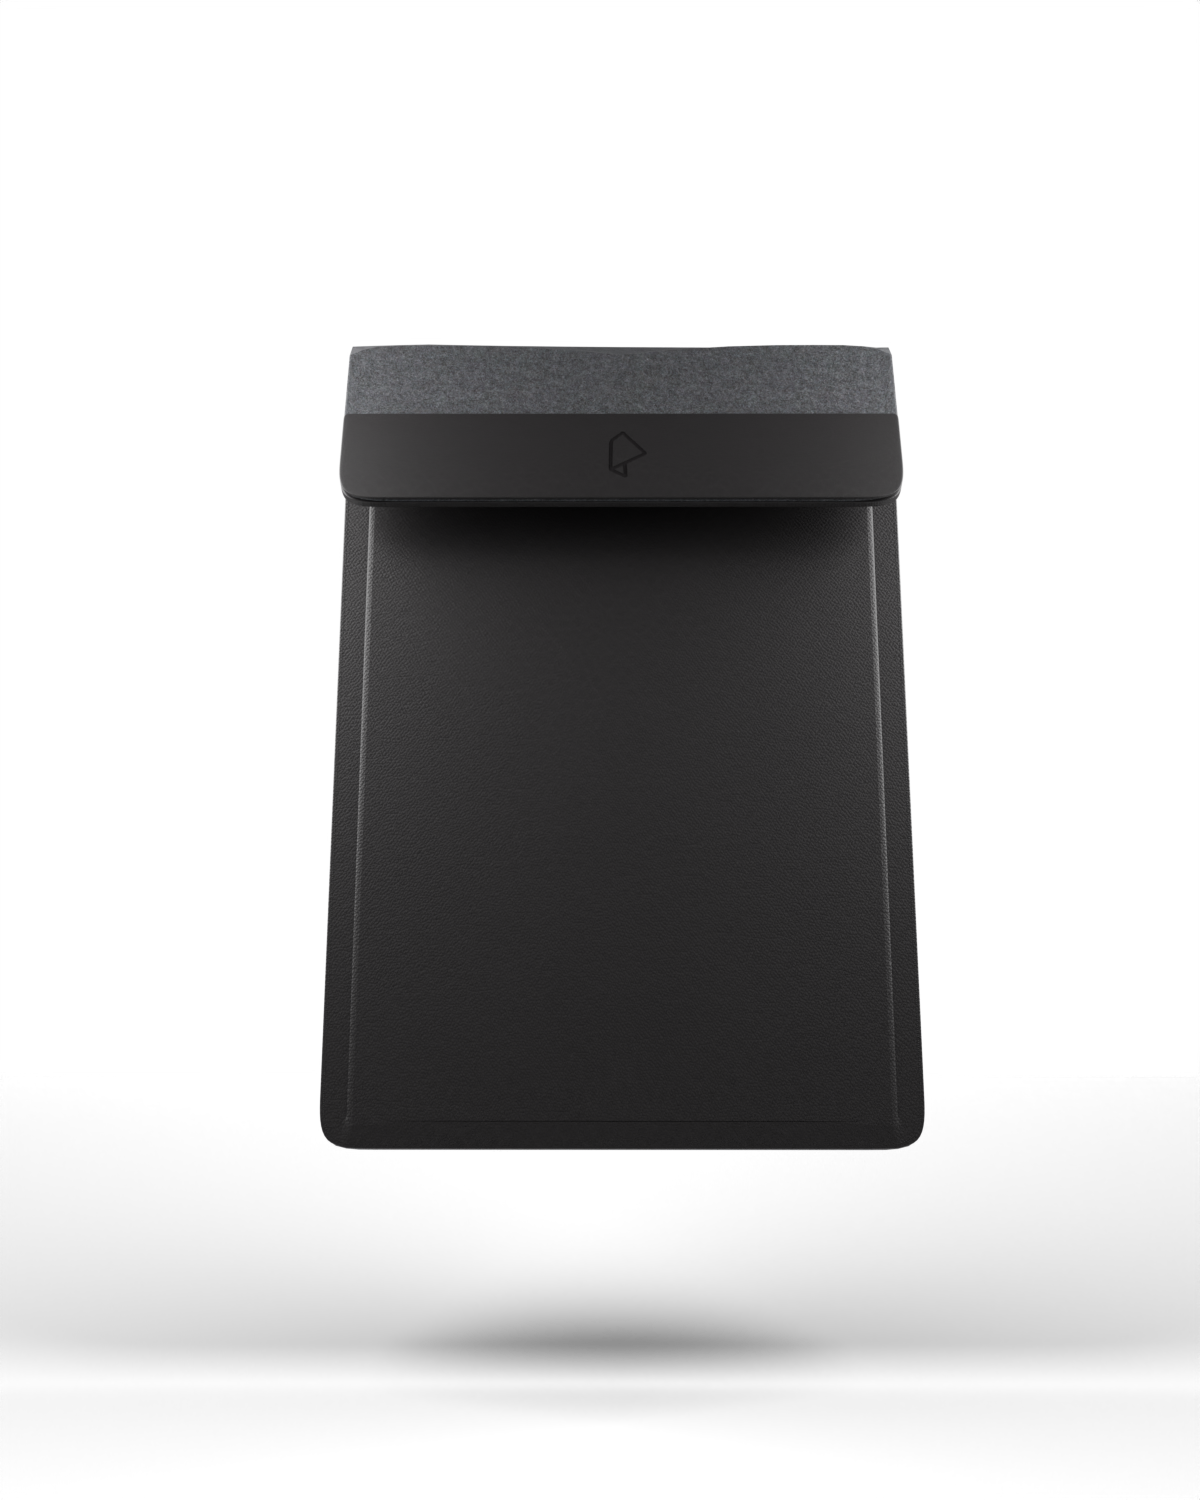 ChargePad Pro